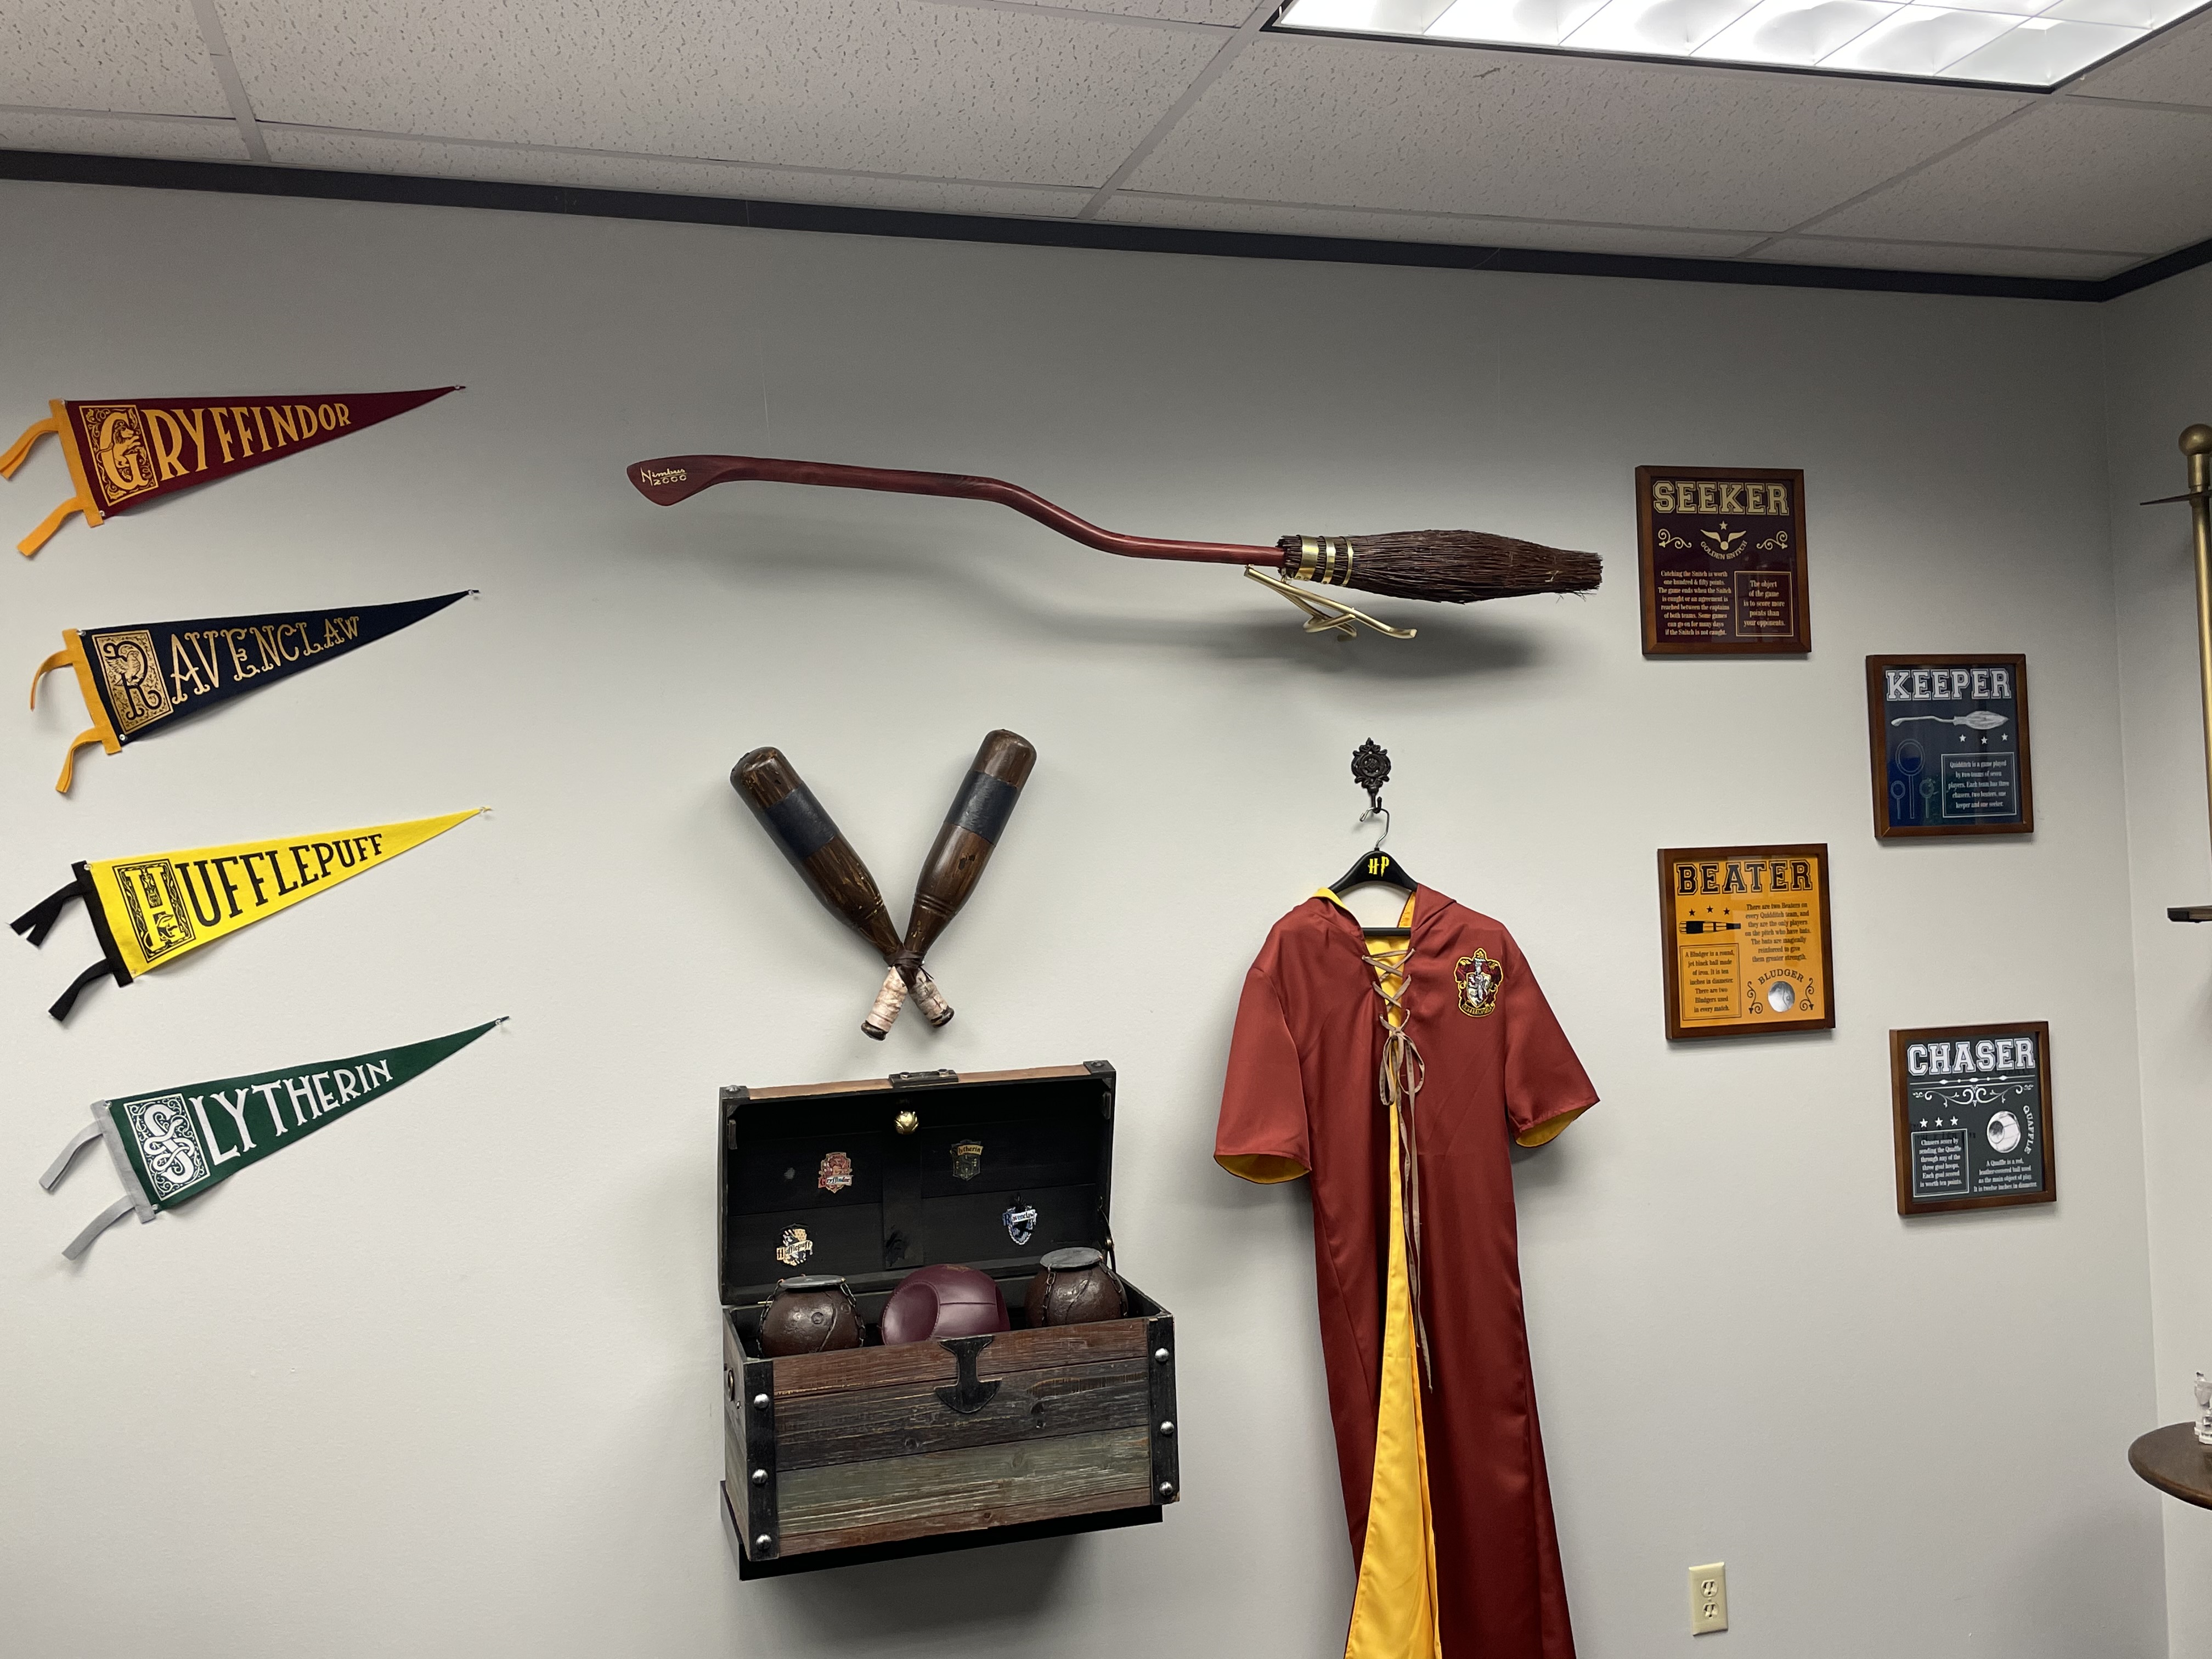 Harry Potter themed conference room added to our already non-traditional  office decor